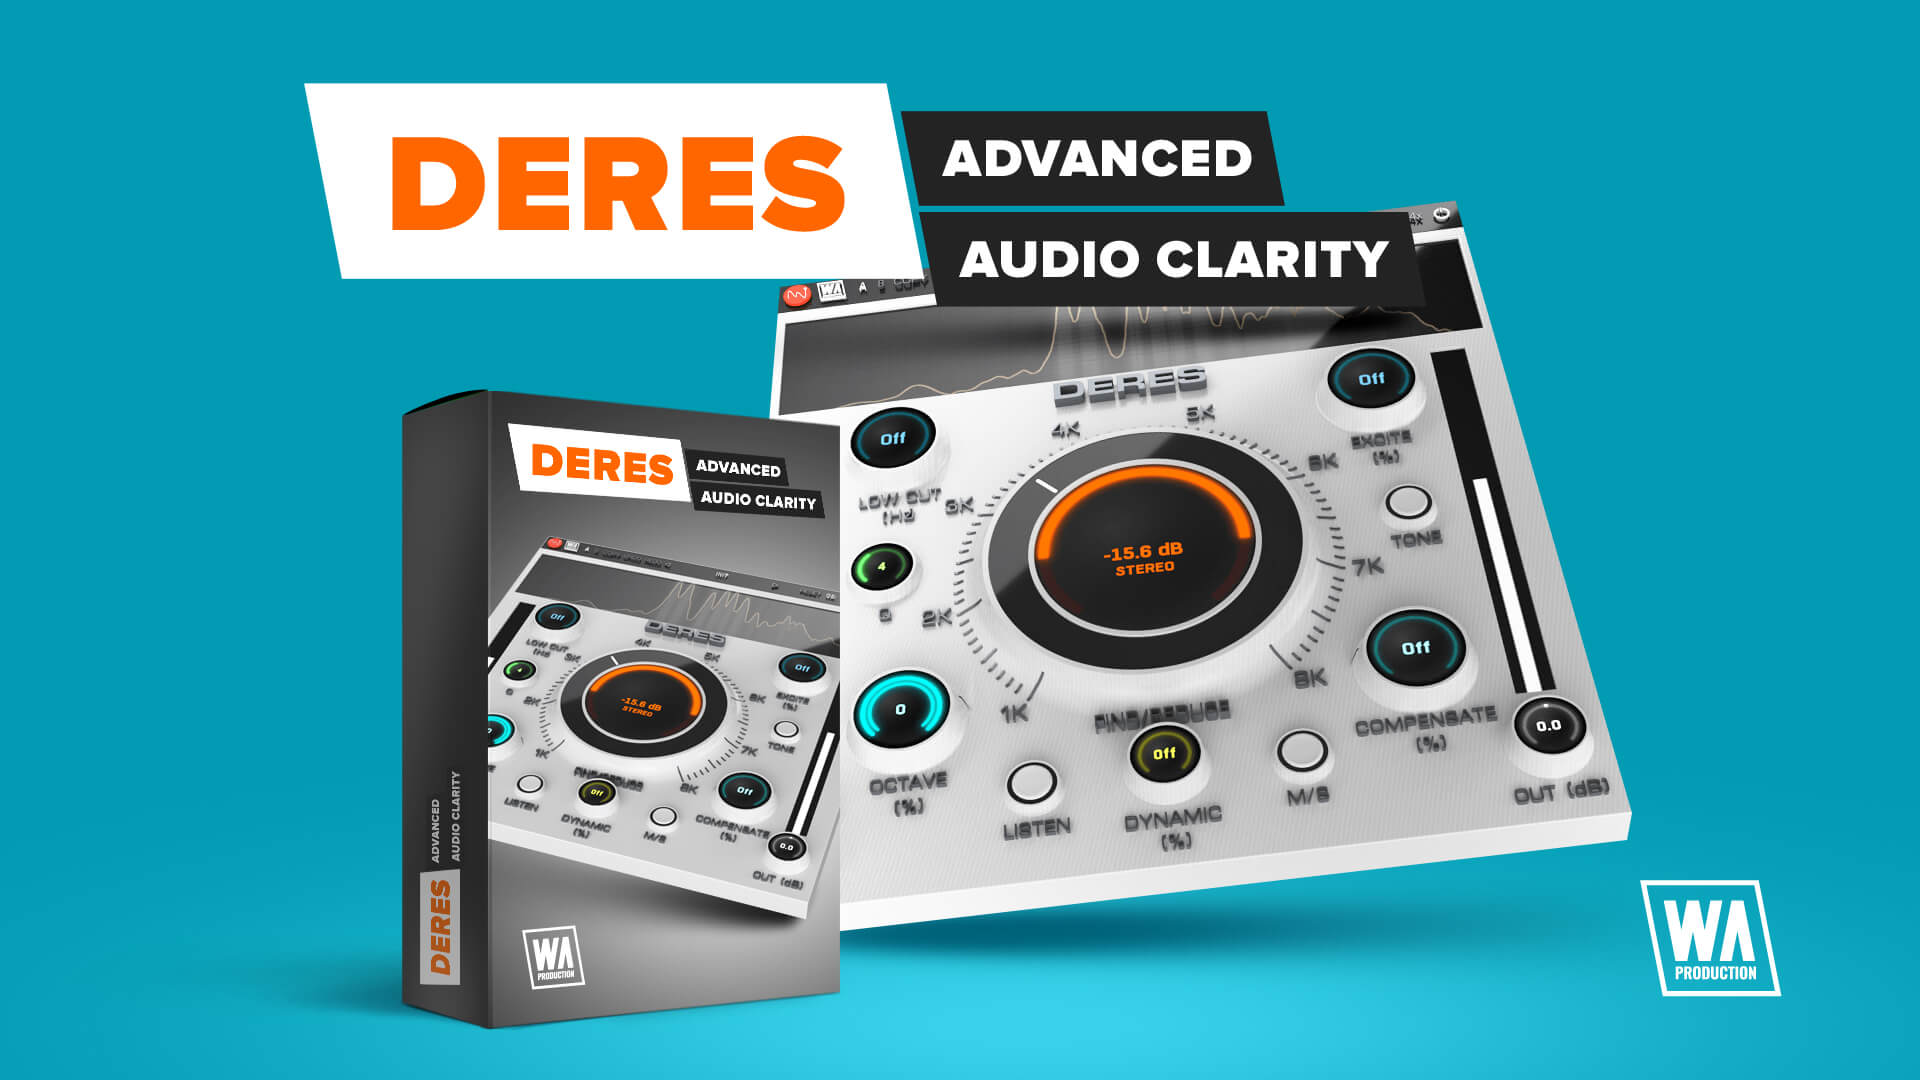 W. A. Production releases "Deres" FX Plugin (67% off)